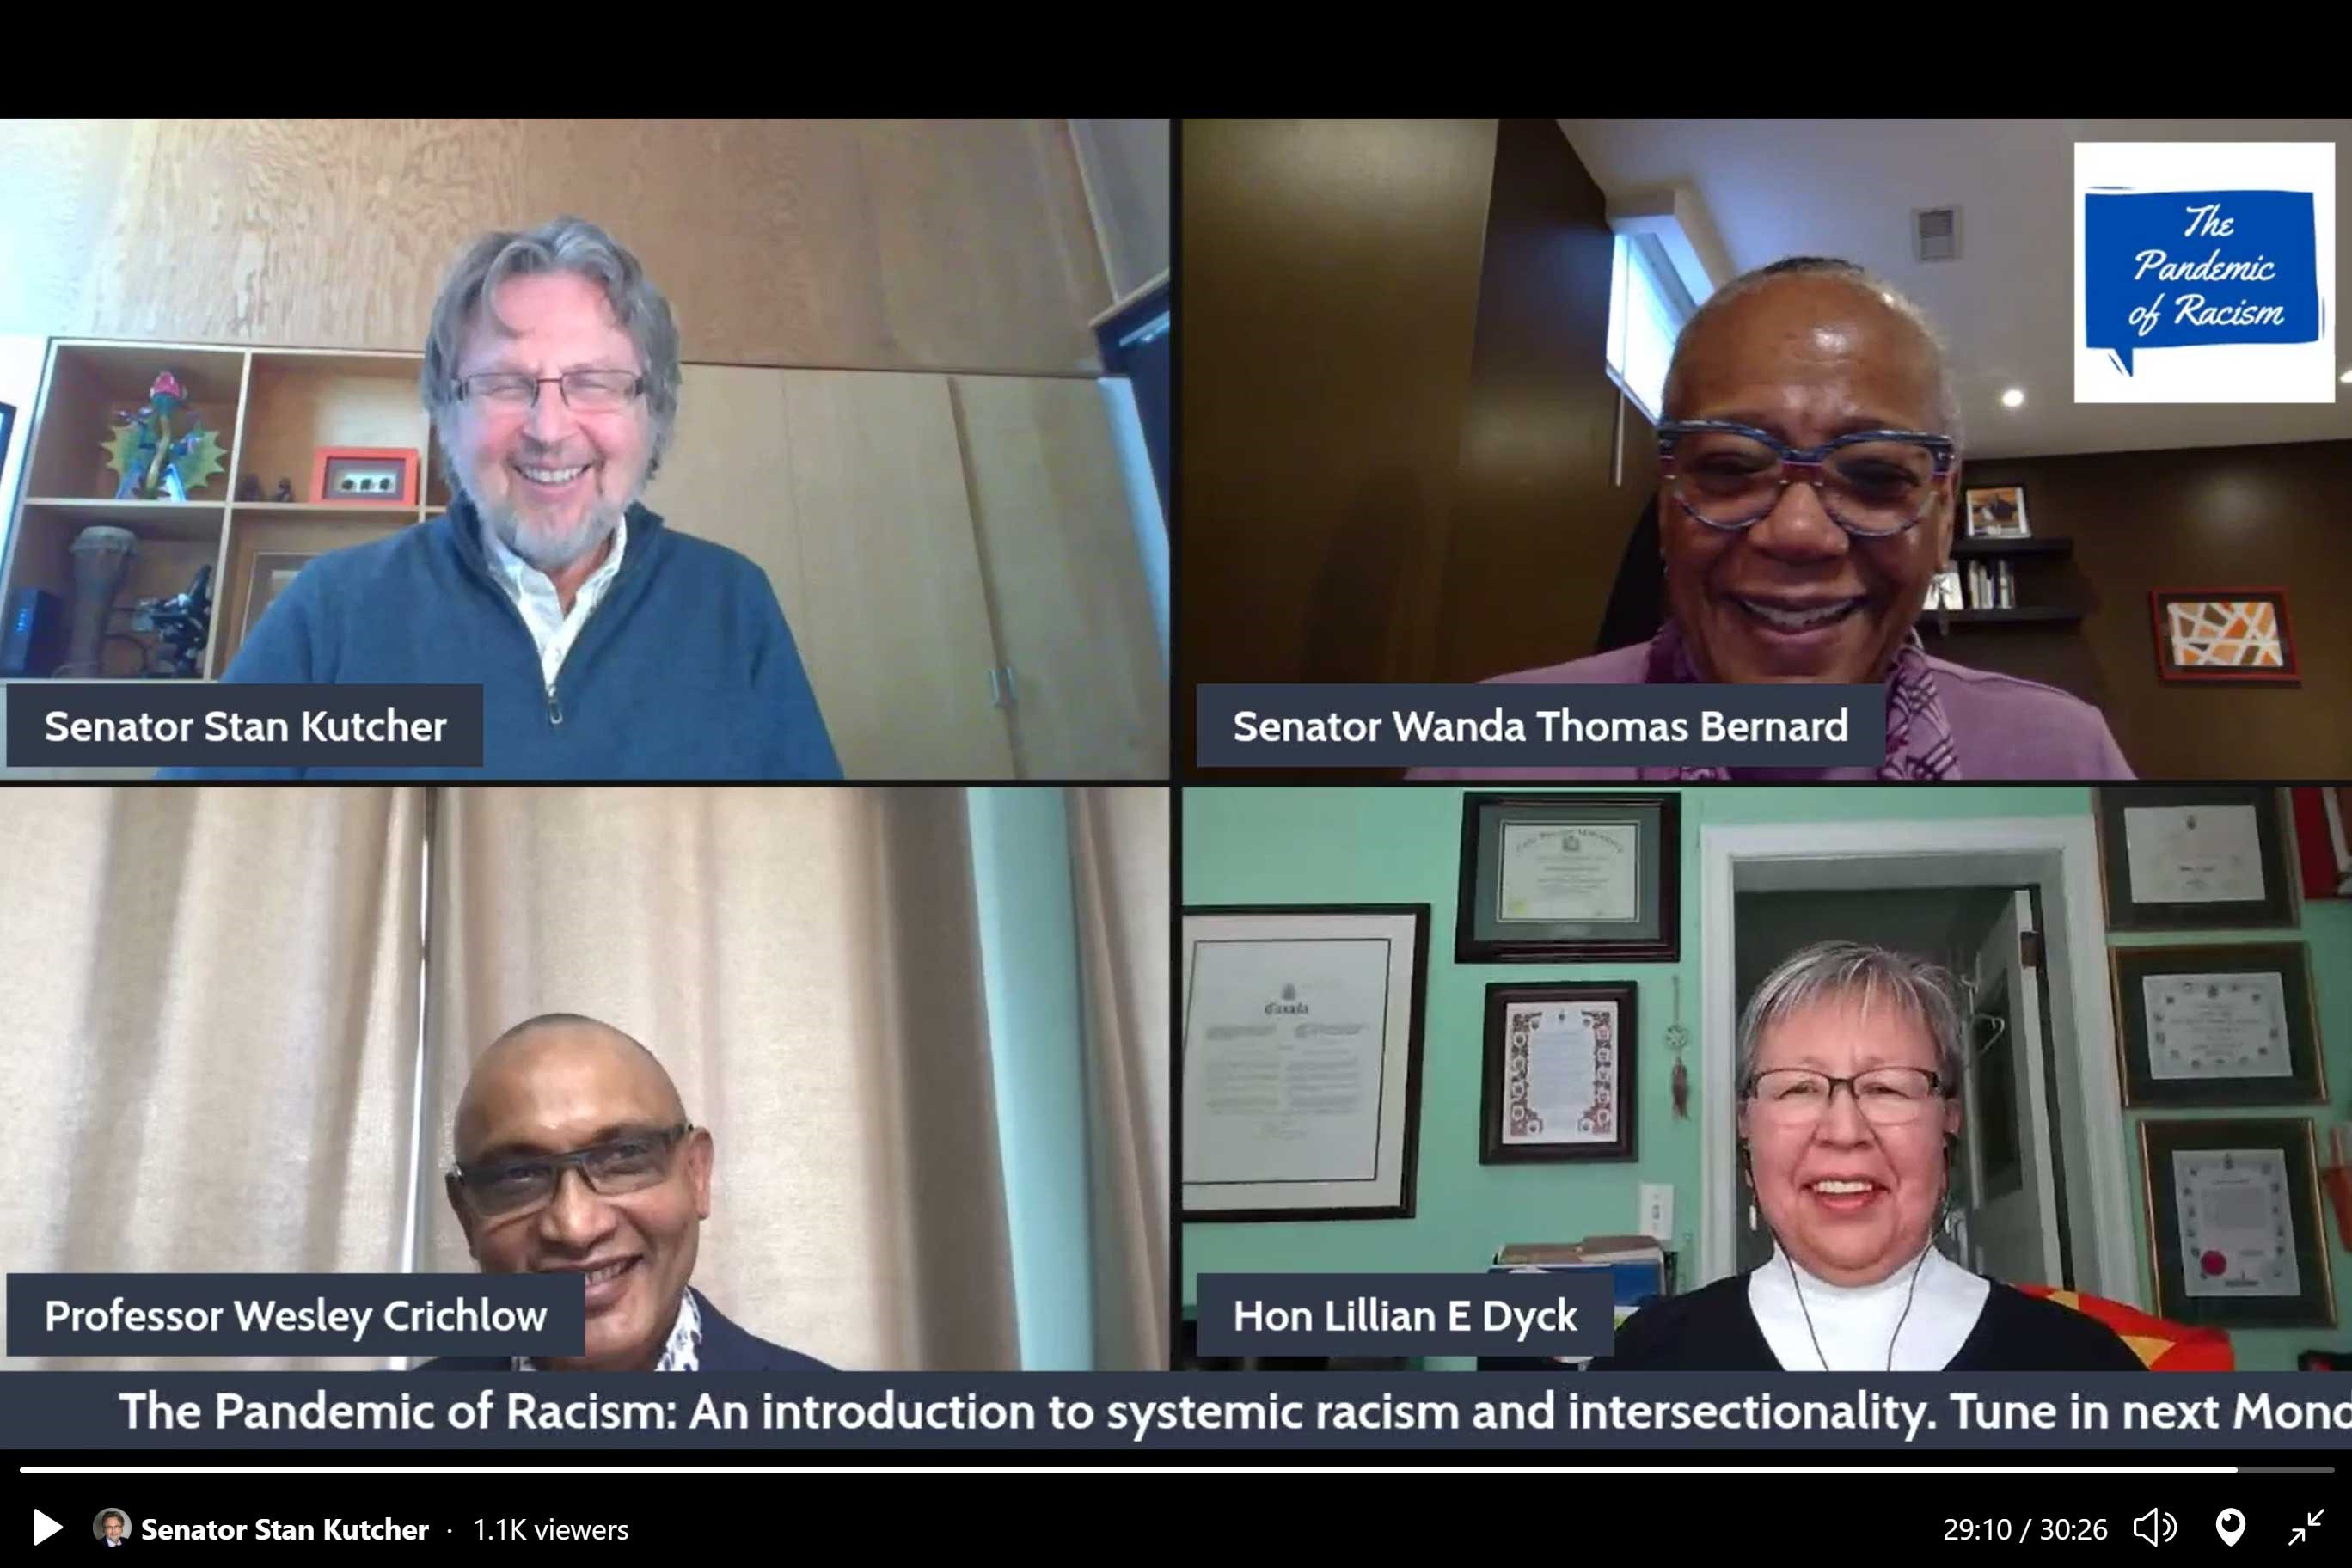 Monday, January 18, 2021 – Senators Stan Kutcher and Wanda Elaine Thomas Bernard co-host a Facebook Live series called The Pandemic of Racism, which continues conversations related to racial injustice and resetting institutions. Session 1, “An Introduction on Systemic Racism and Intersectionality” included special guests the Honourable Lillian Dyck, a former senator, and Dr. Wesley Crichlow.